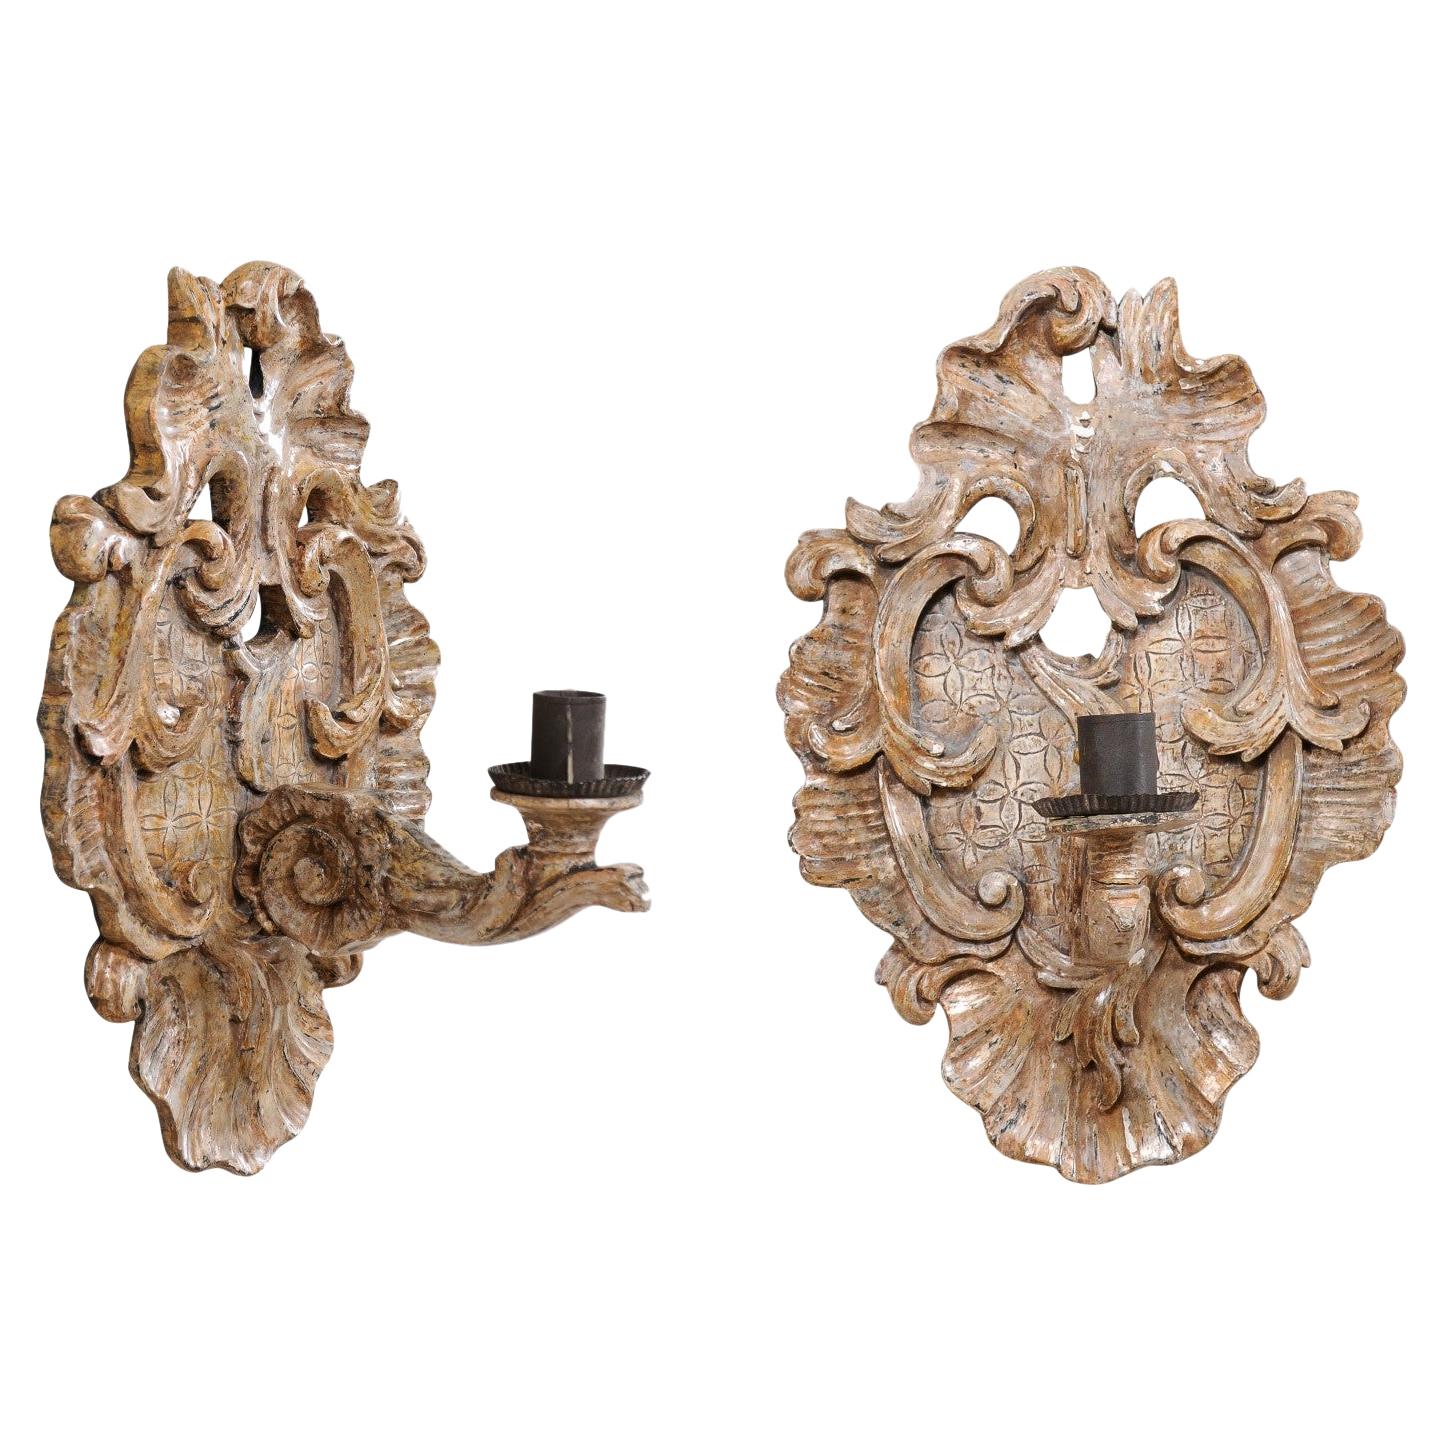 Antique Pair of Acanthus Leaf-Carved Single-Candle Wall Sconces from Italy For Sale